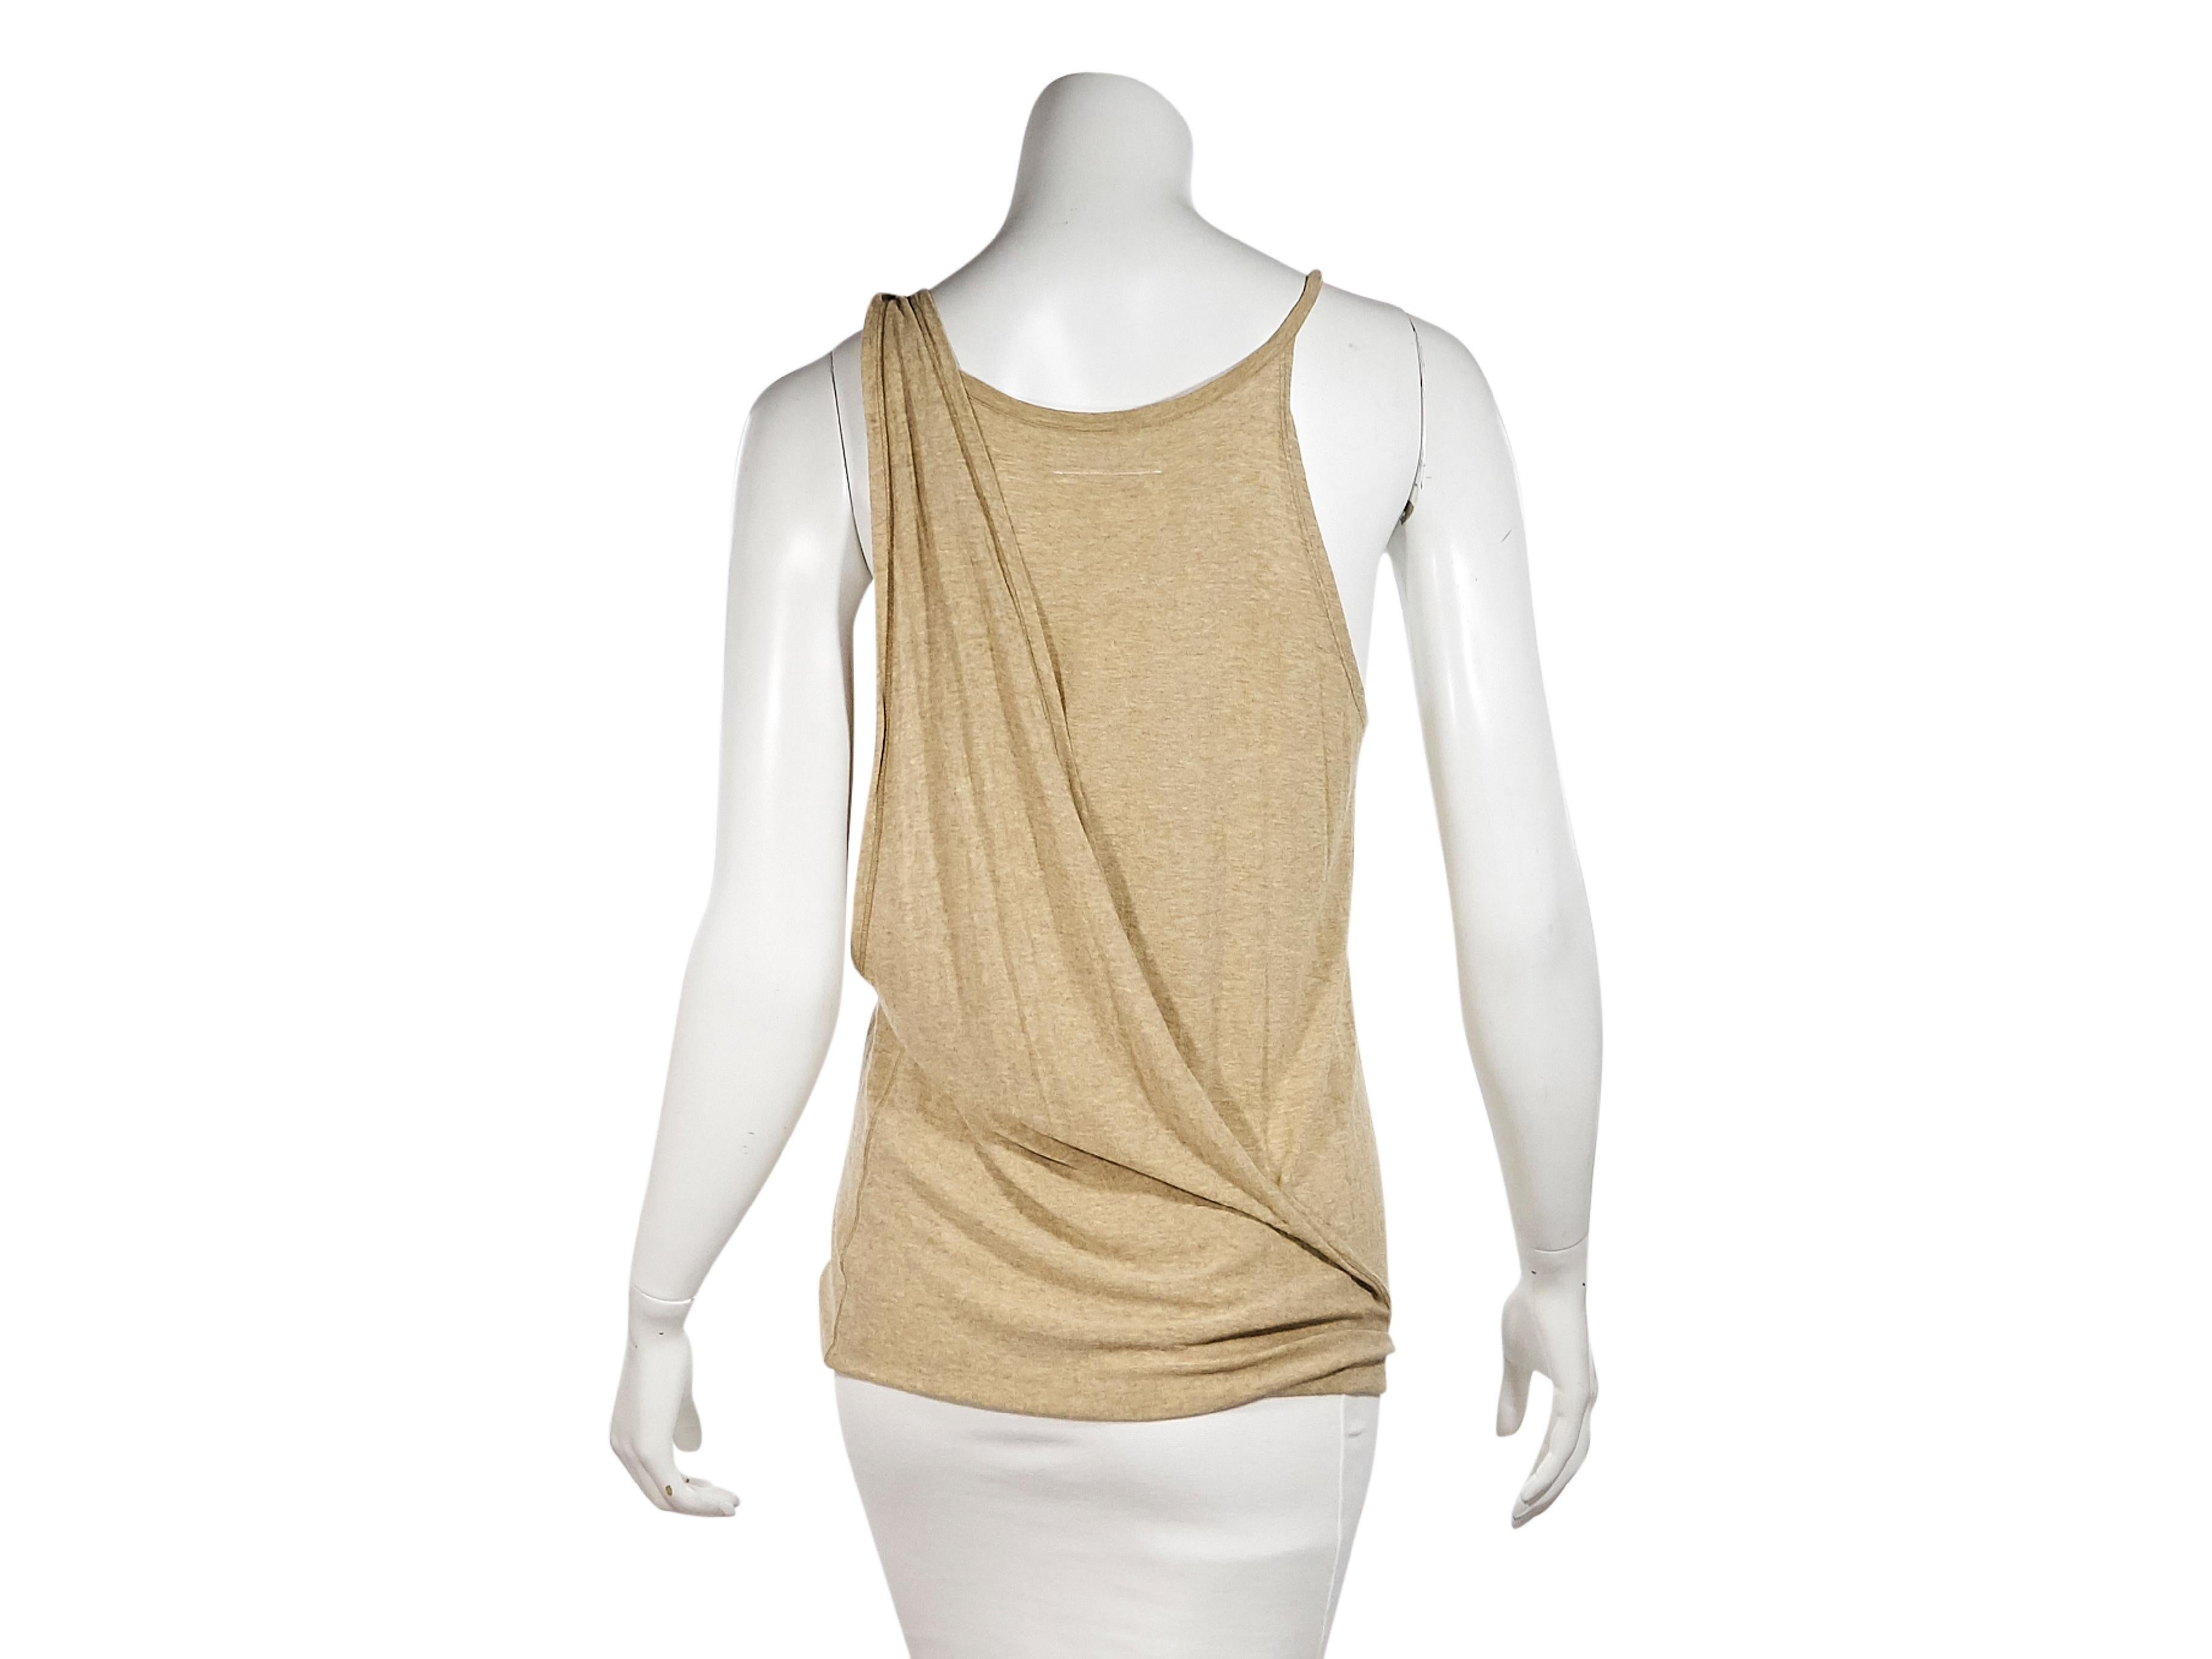 Product details:  Tan draped tank top by Maison Martin Margiela.  Scoopneck.  Sleeveless.  Pullover style.    
Condition: Pre-owned. Very good. 
Est. Retail $ 895.00